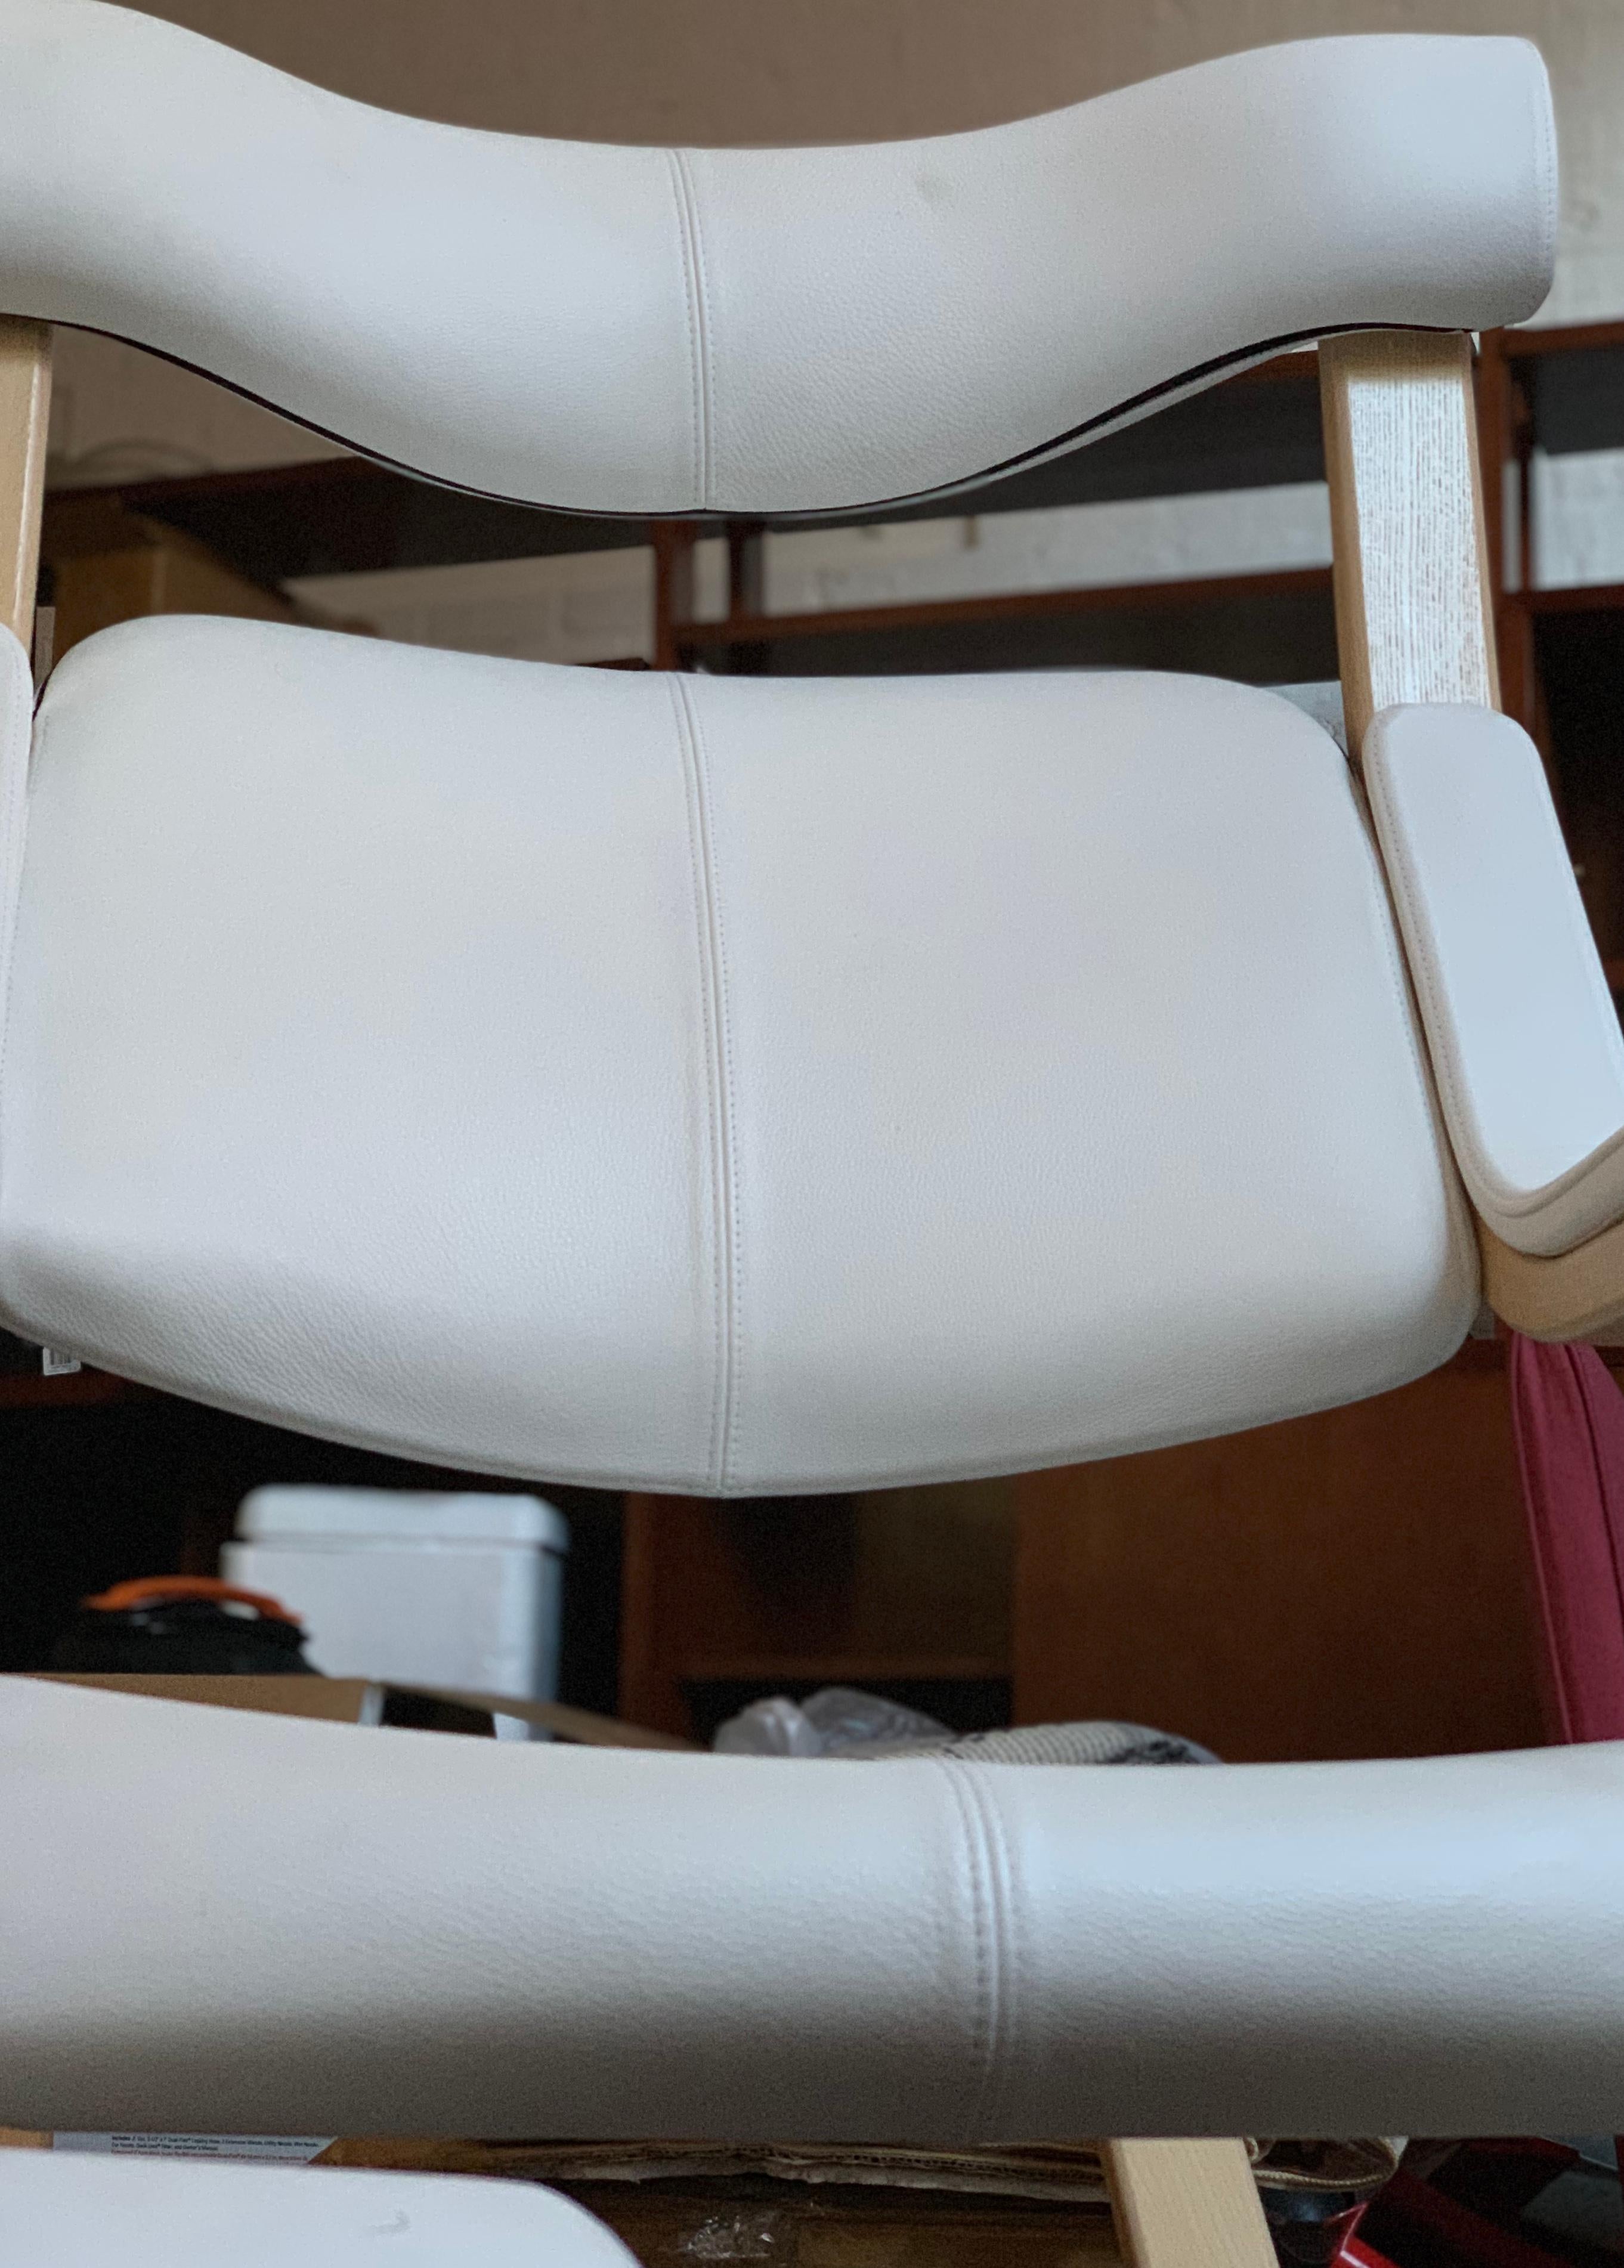 Varier Stokke Gravity Balans chair, custom white leather and beach, peter Opsvik, 1984. Experience ultimate relaxation and weightlessness with the Gravity. The design Classic supports your back and neck while continuously promoting flow and movement